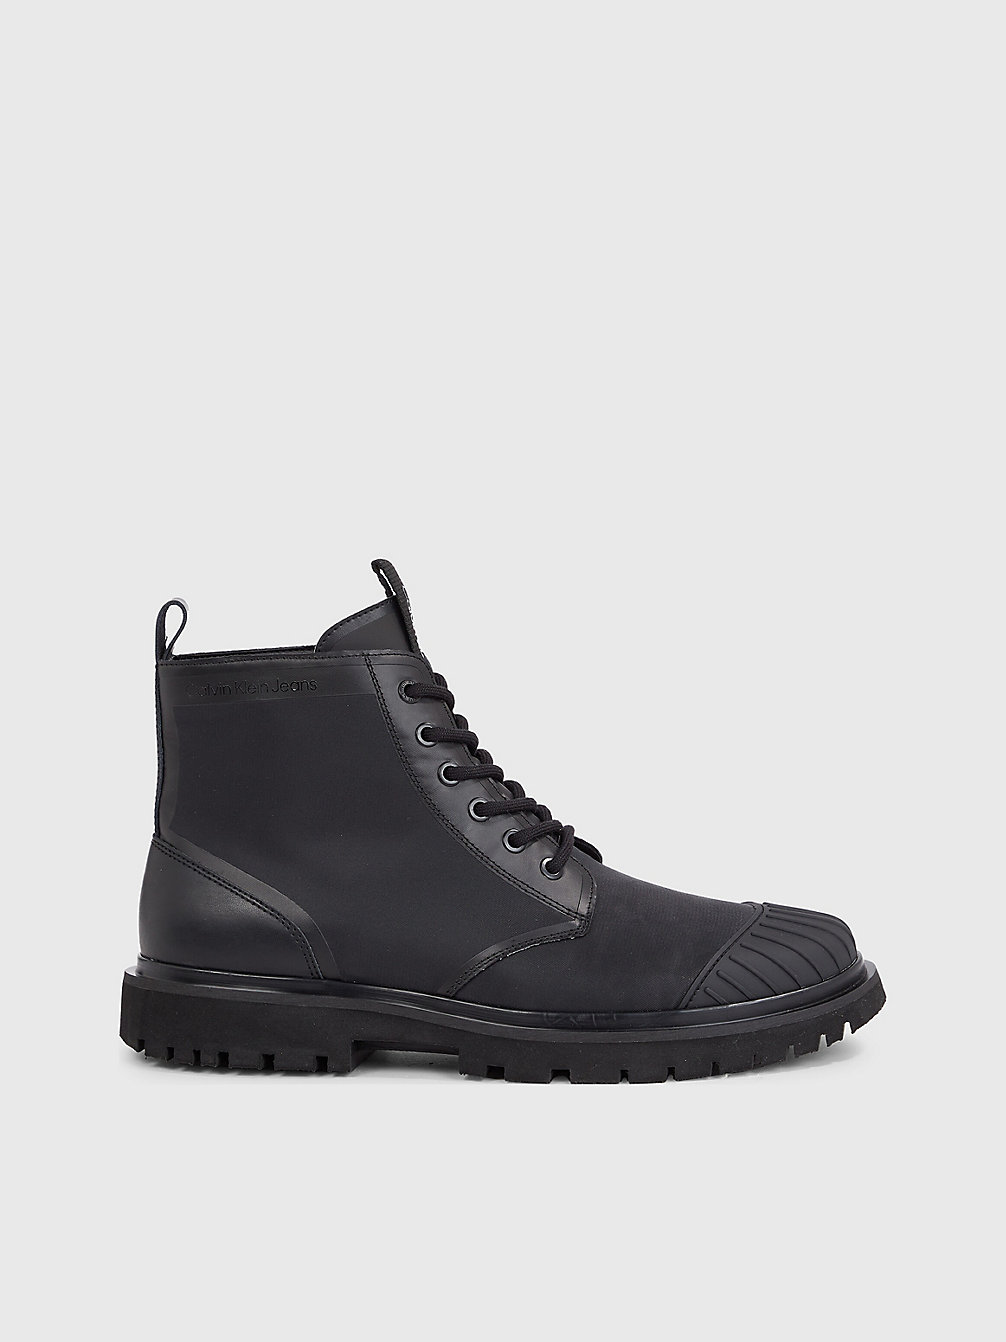 TRIPLE BLACK Recycled Nylon Boots undefined men Calvin Klein